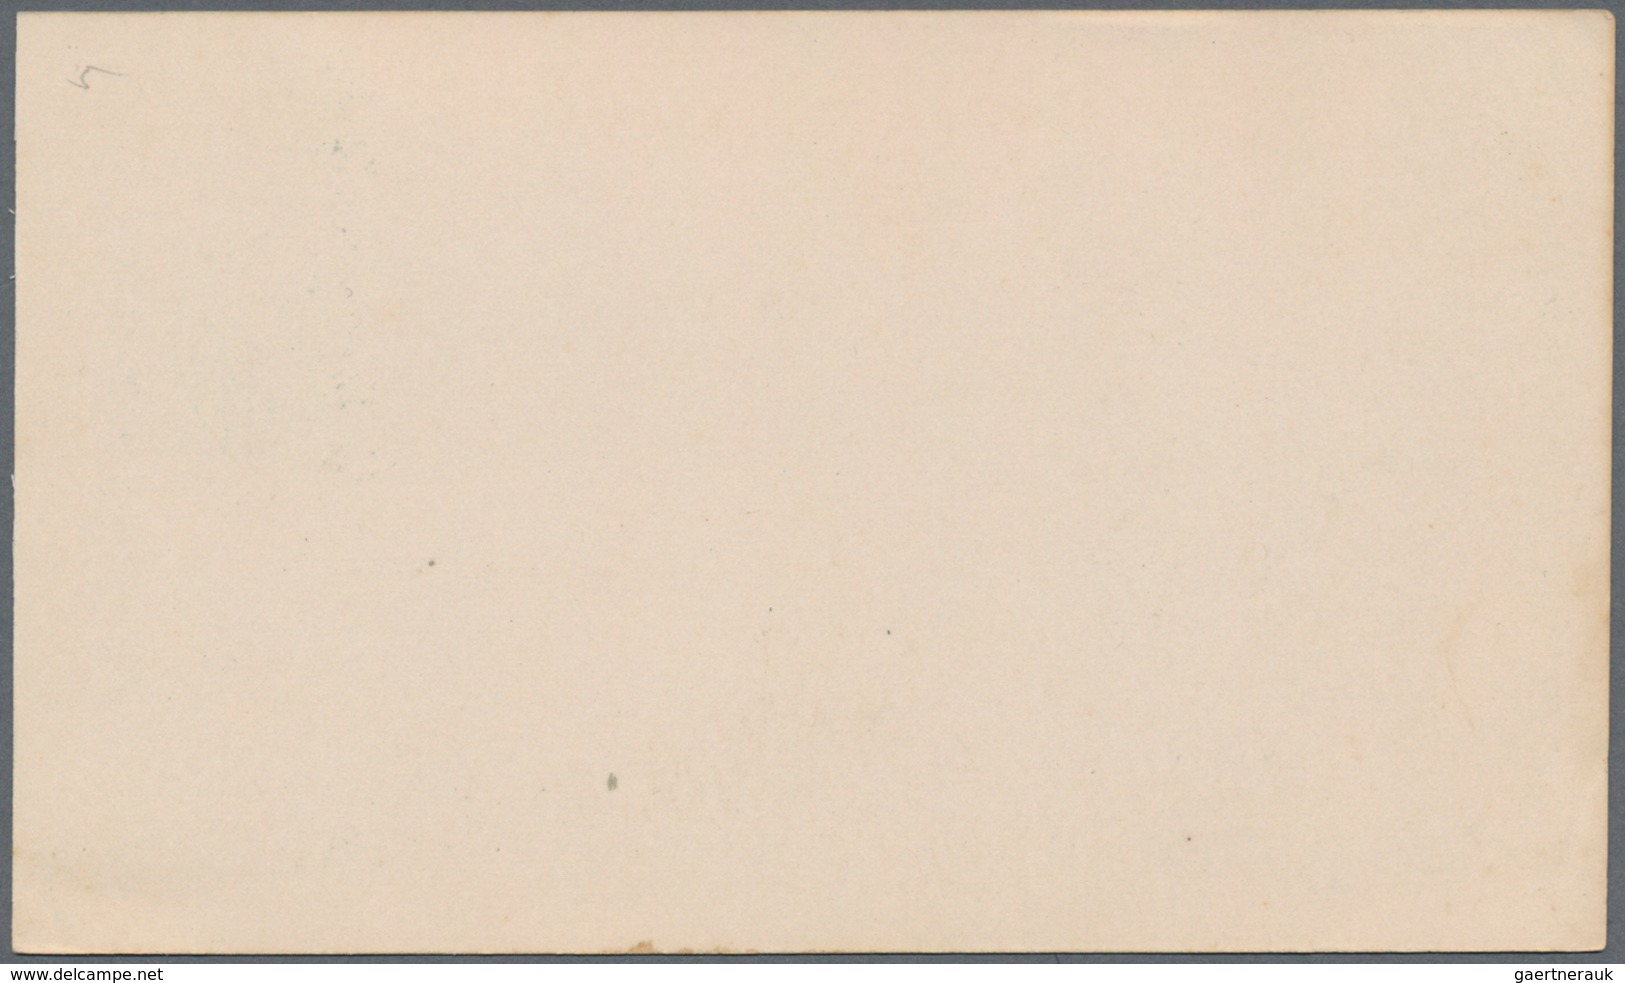 Dominikanische Republik: 1881 Two Unused Postal Stationery Cards 2 Centavos Green On White, One Card - Dominican Republic